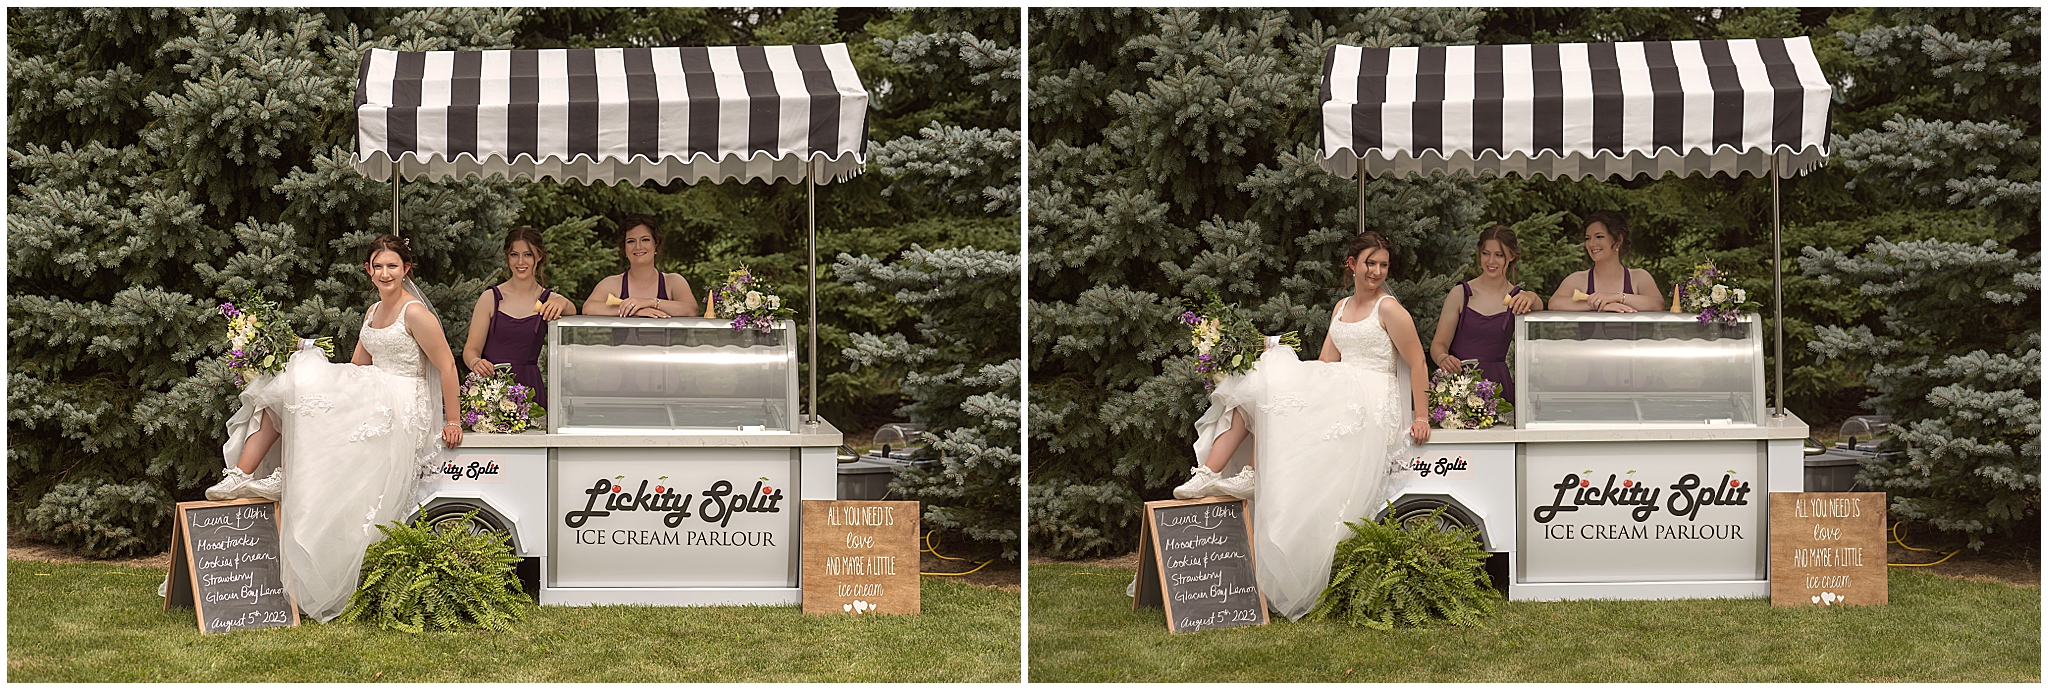 bride and bridesmaids posing by ice cream cart for professional wedding photographer in london ontario